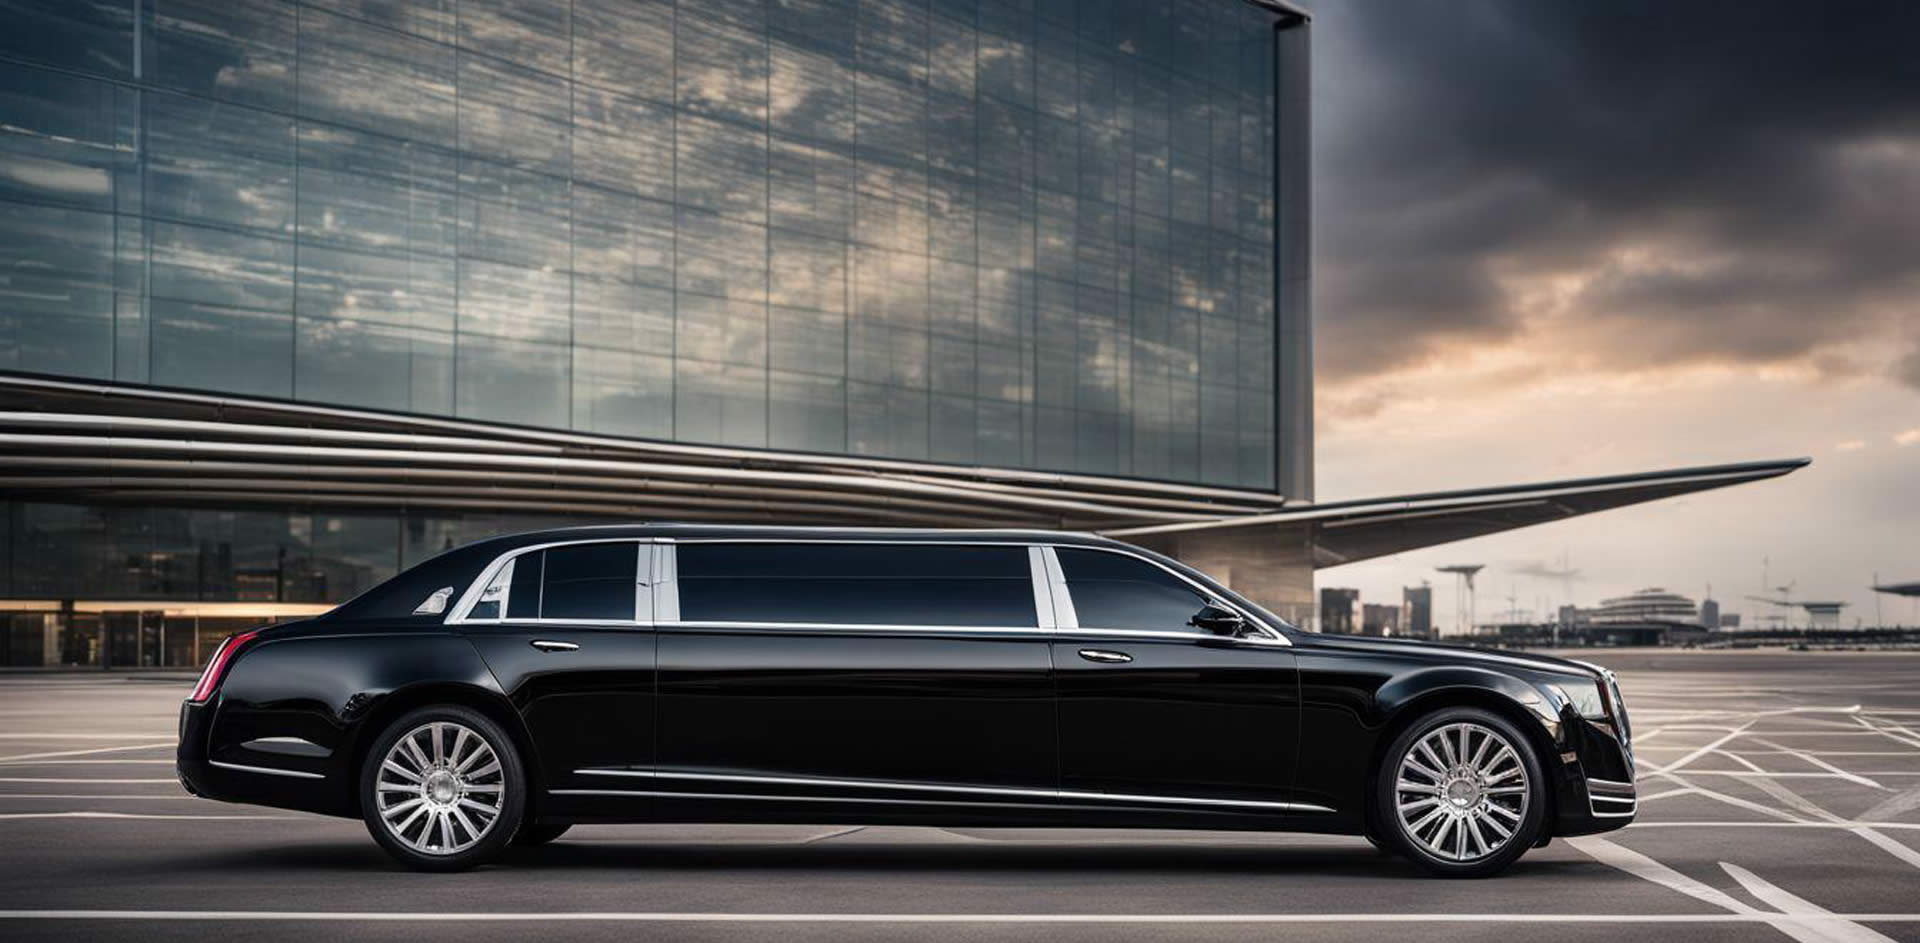 A black limousine parked in front of a building